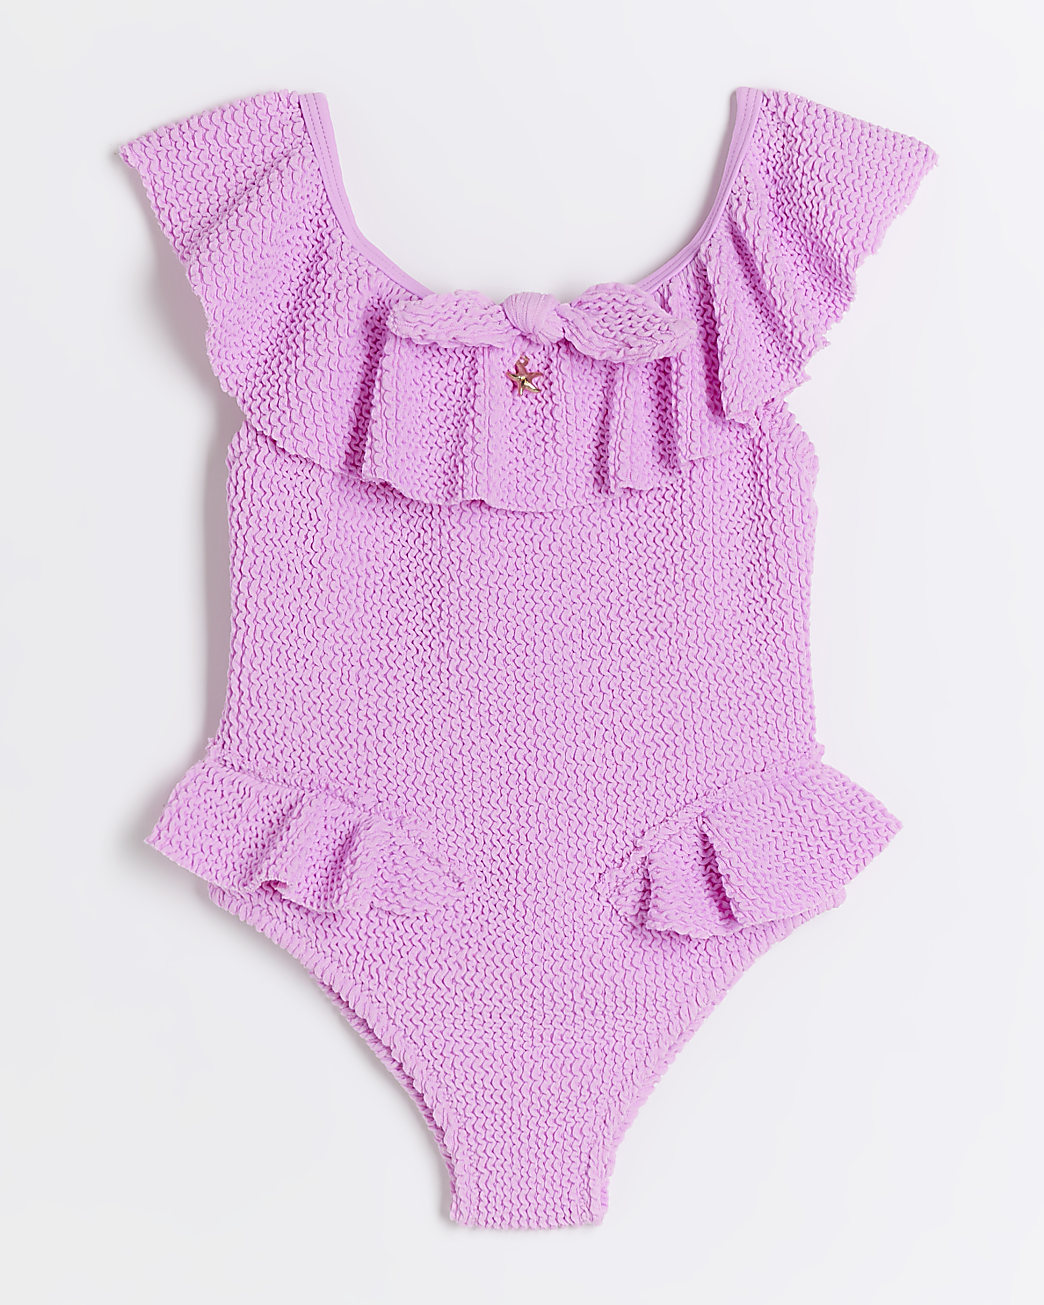 Girls denim dress with purple, pink, red & green body suit. Size 9-12 mths.